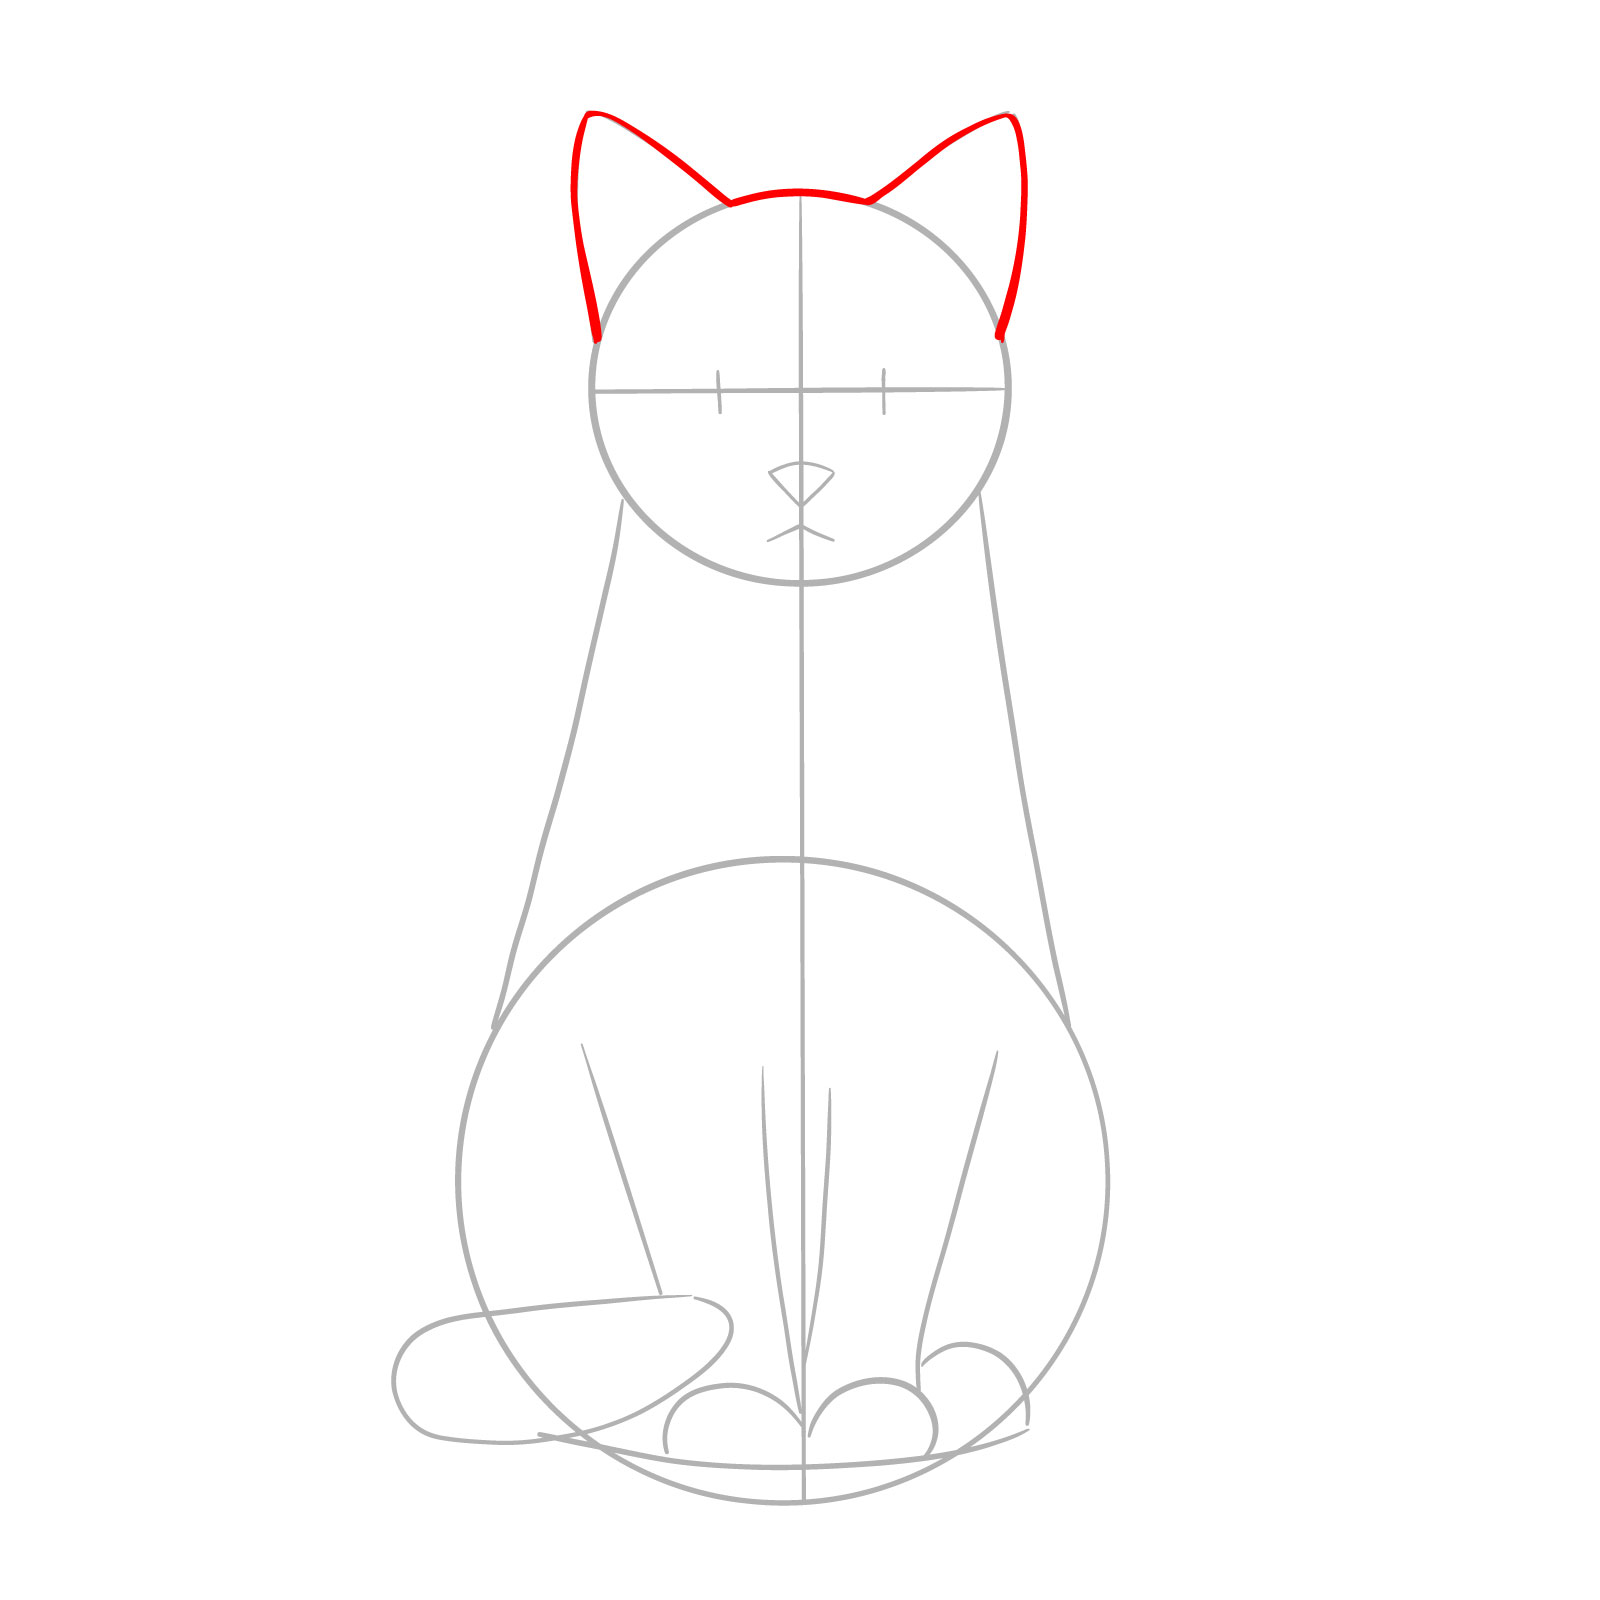 Outline of a cat's head and ears for a sitting cat drawing - step 03